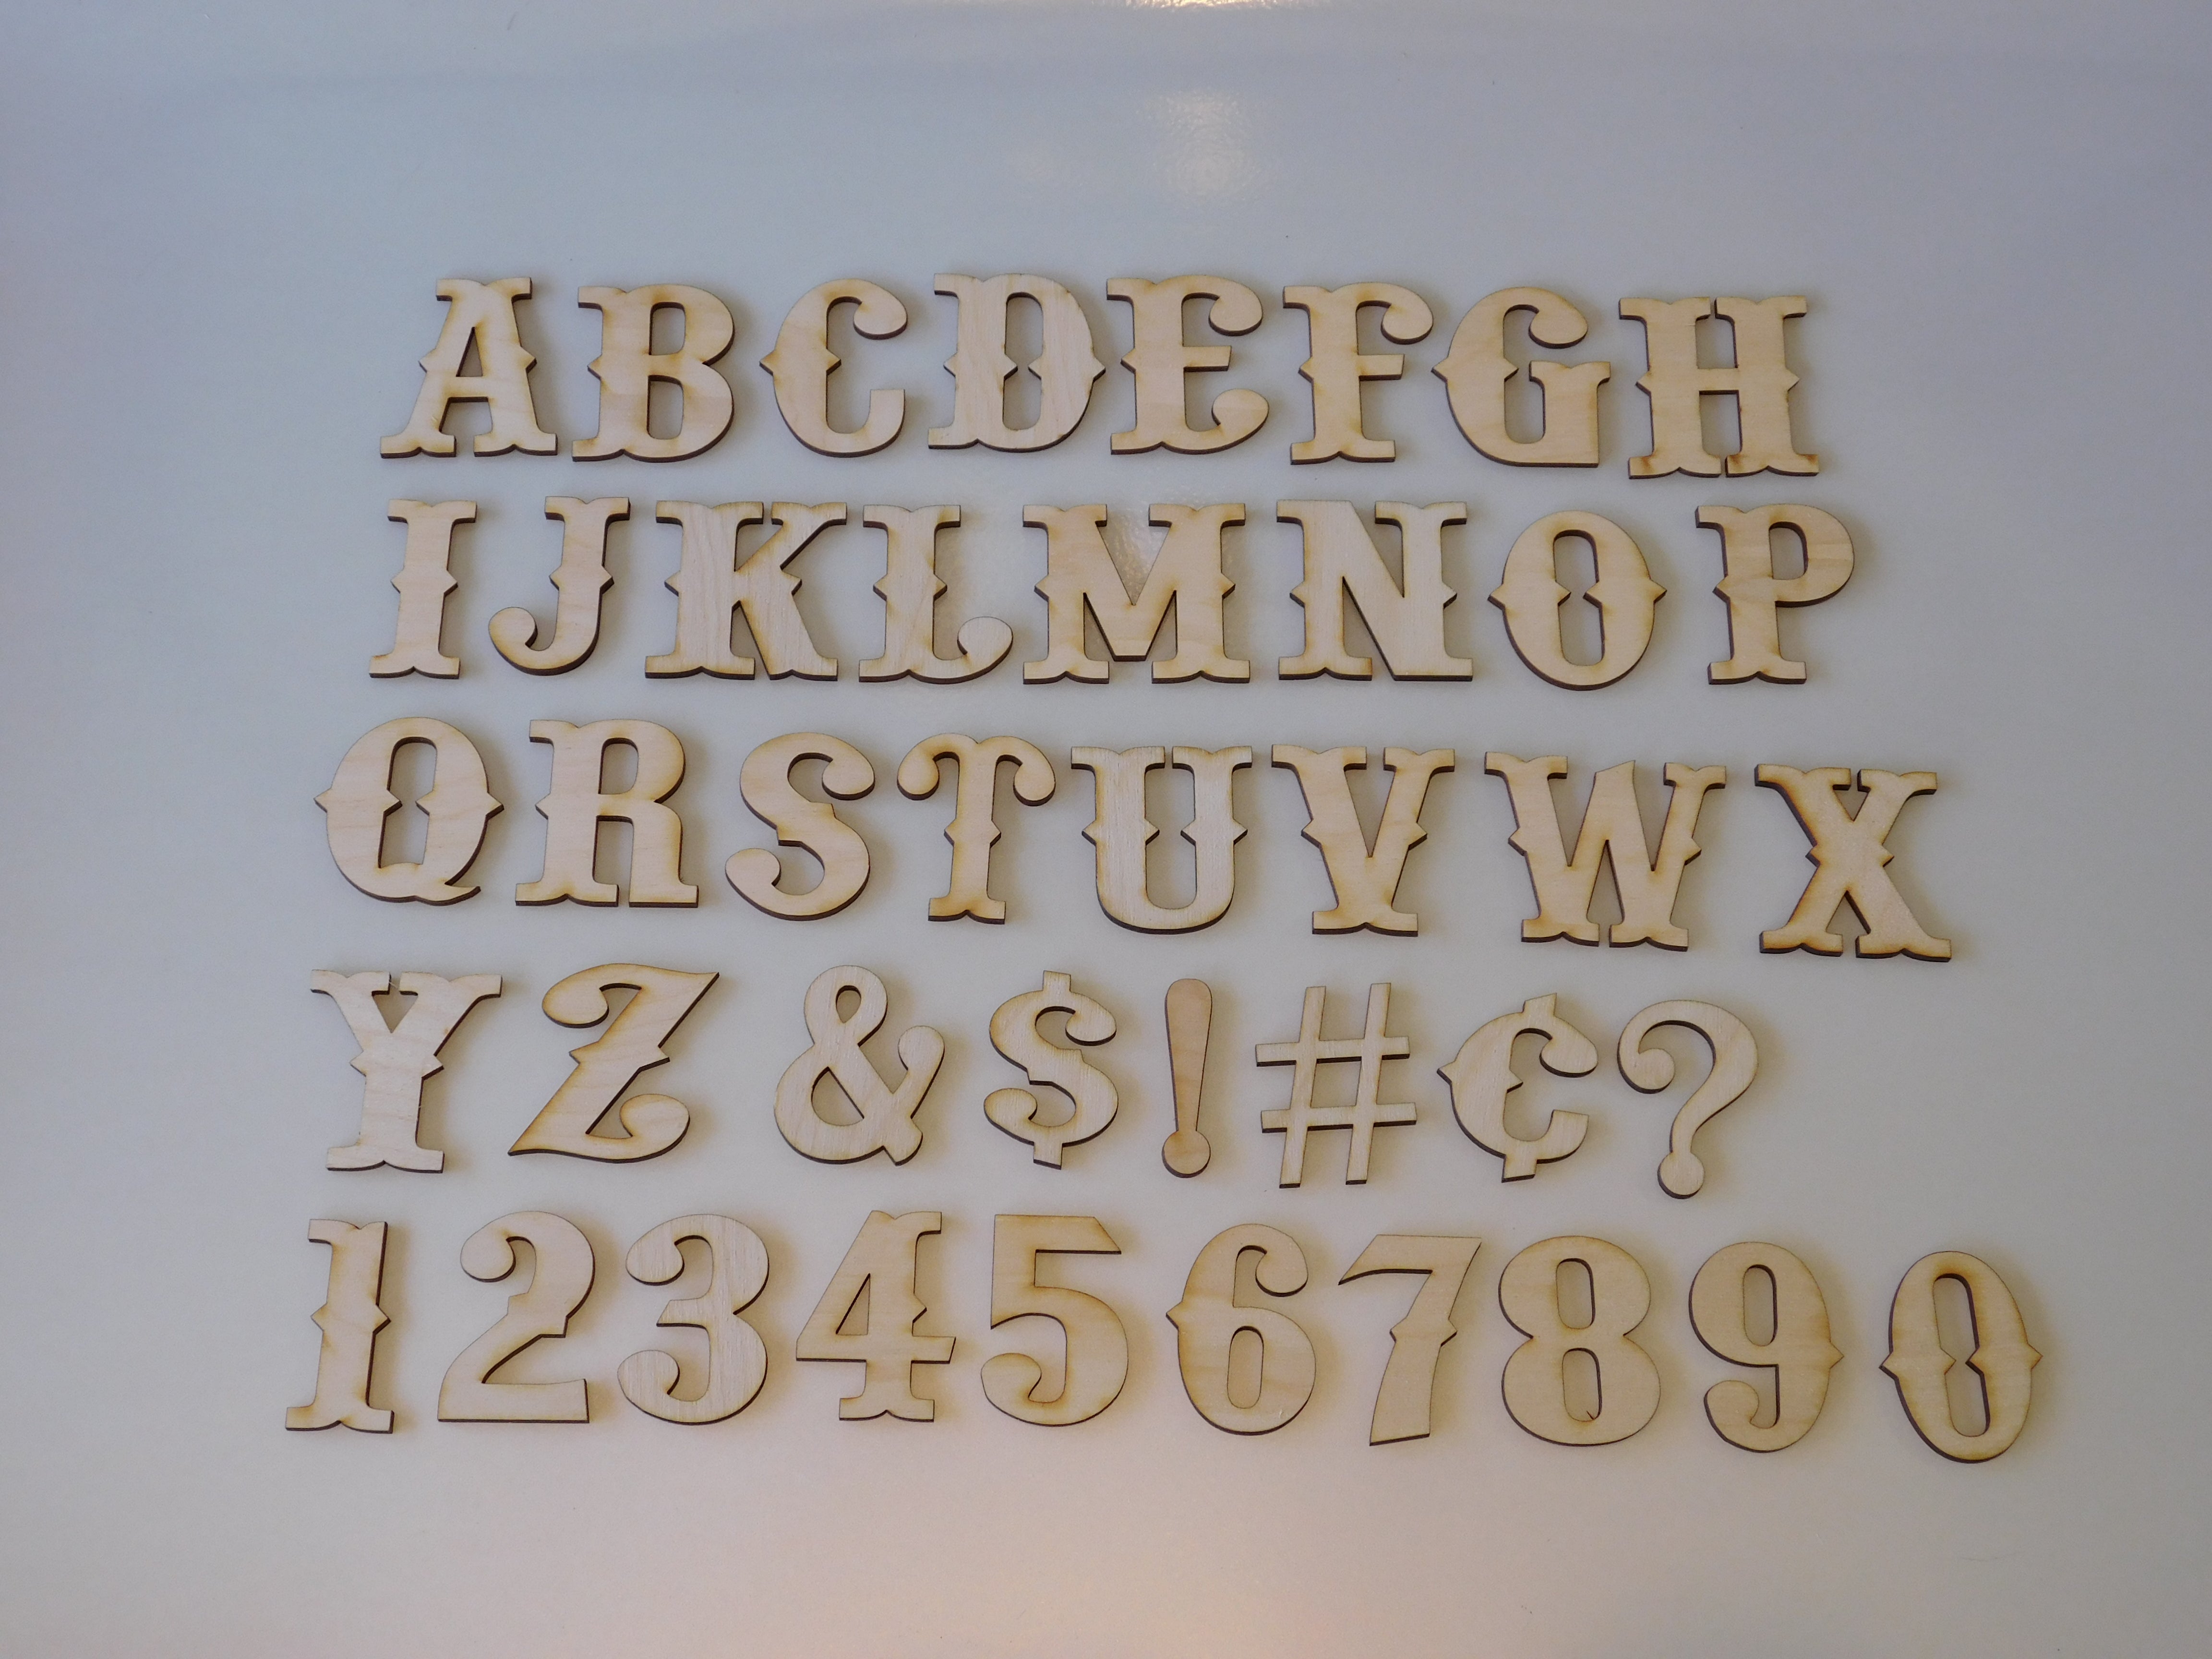 3 Inch INDIVIDUAL Clarendon Layout Letters/Numbers